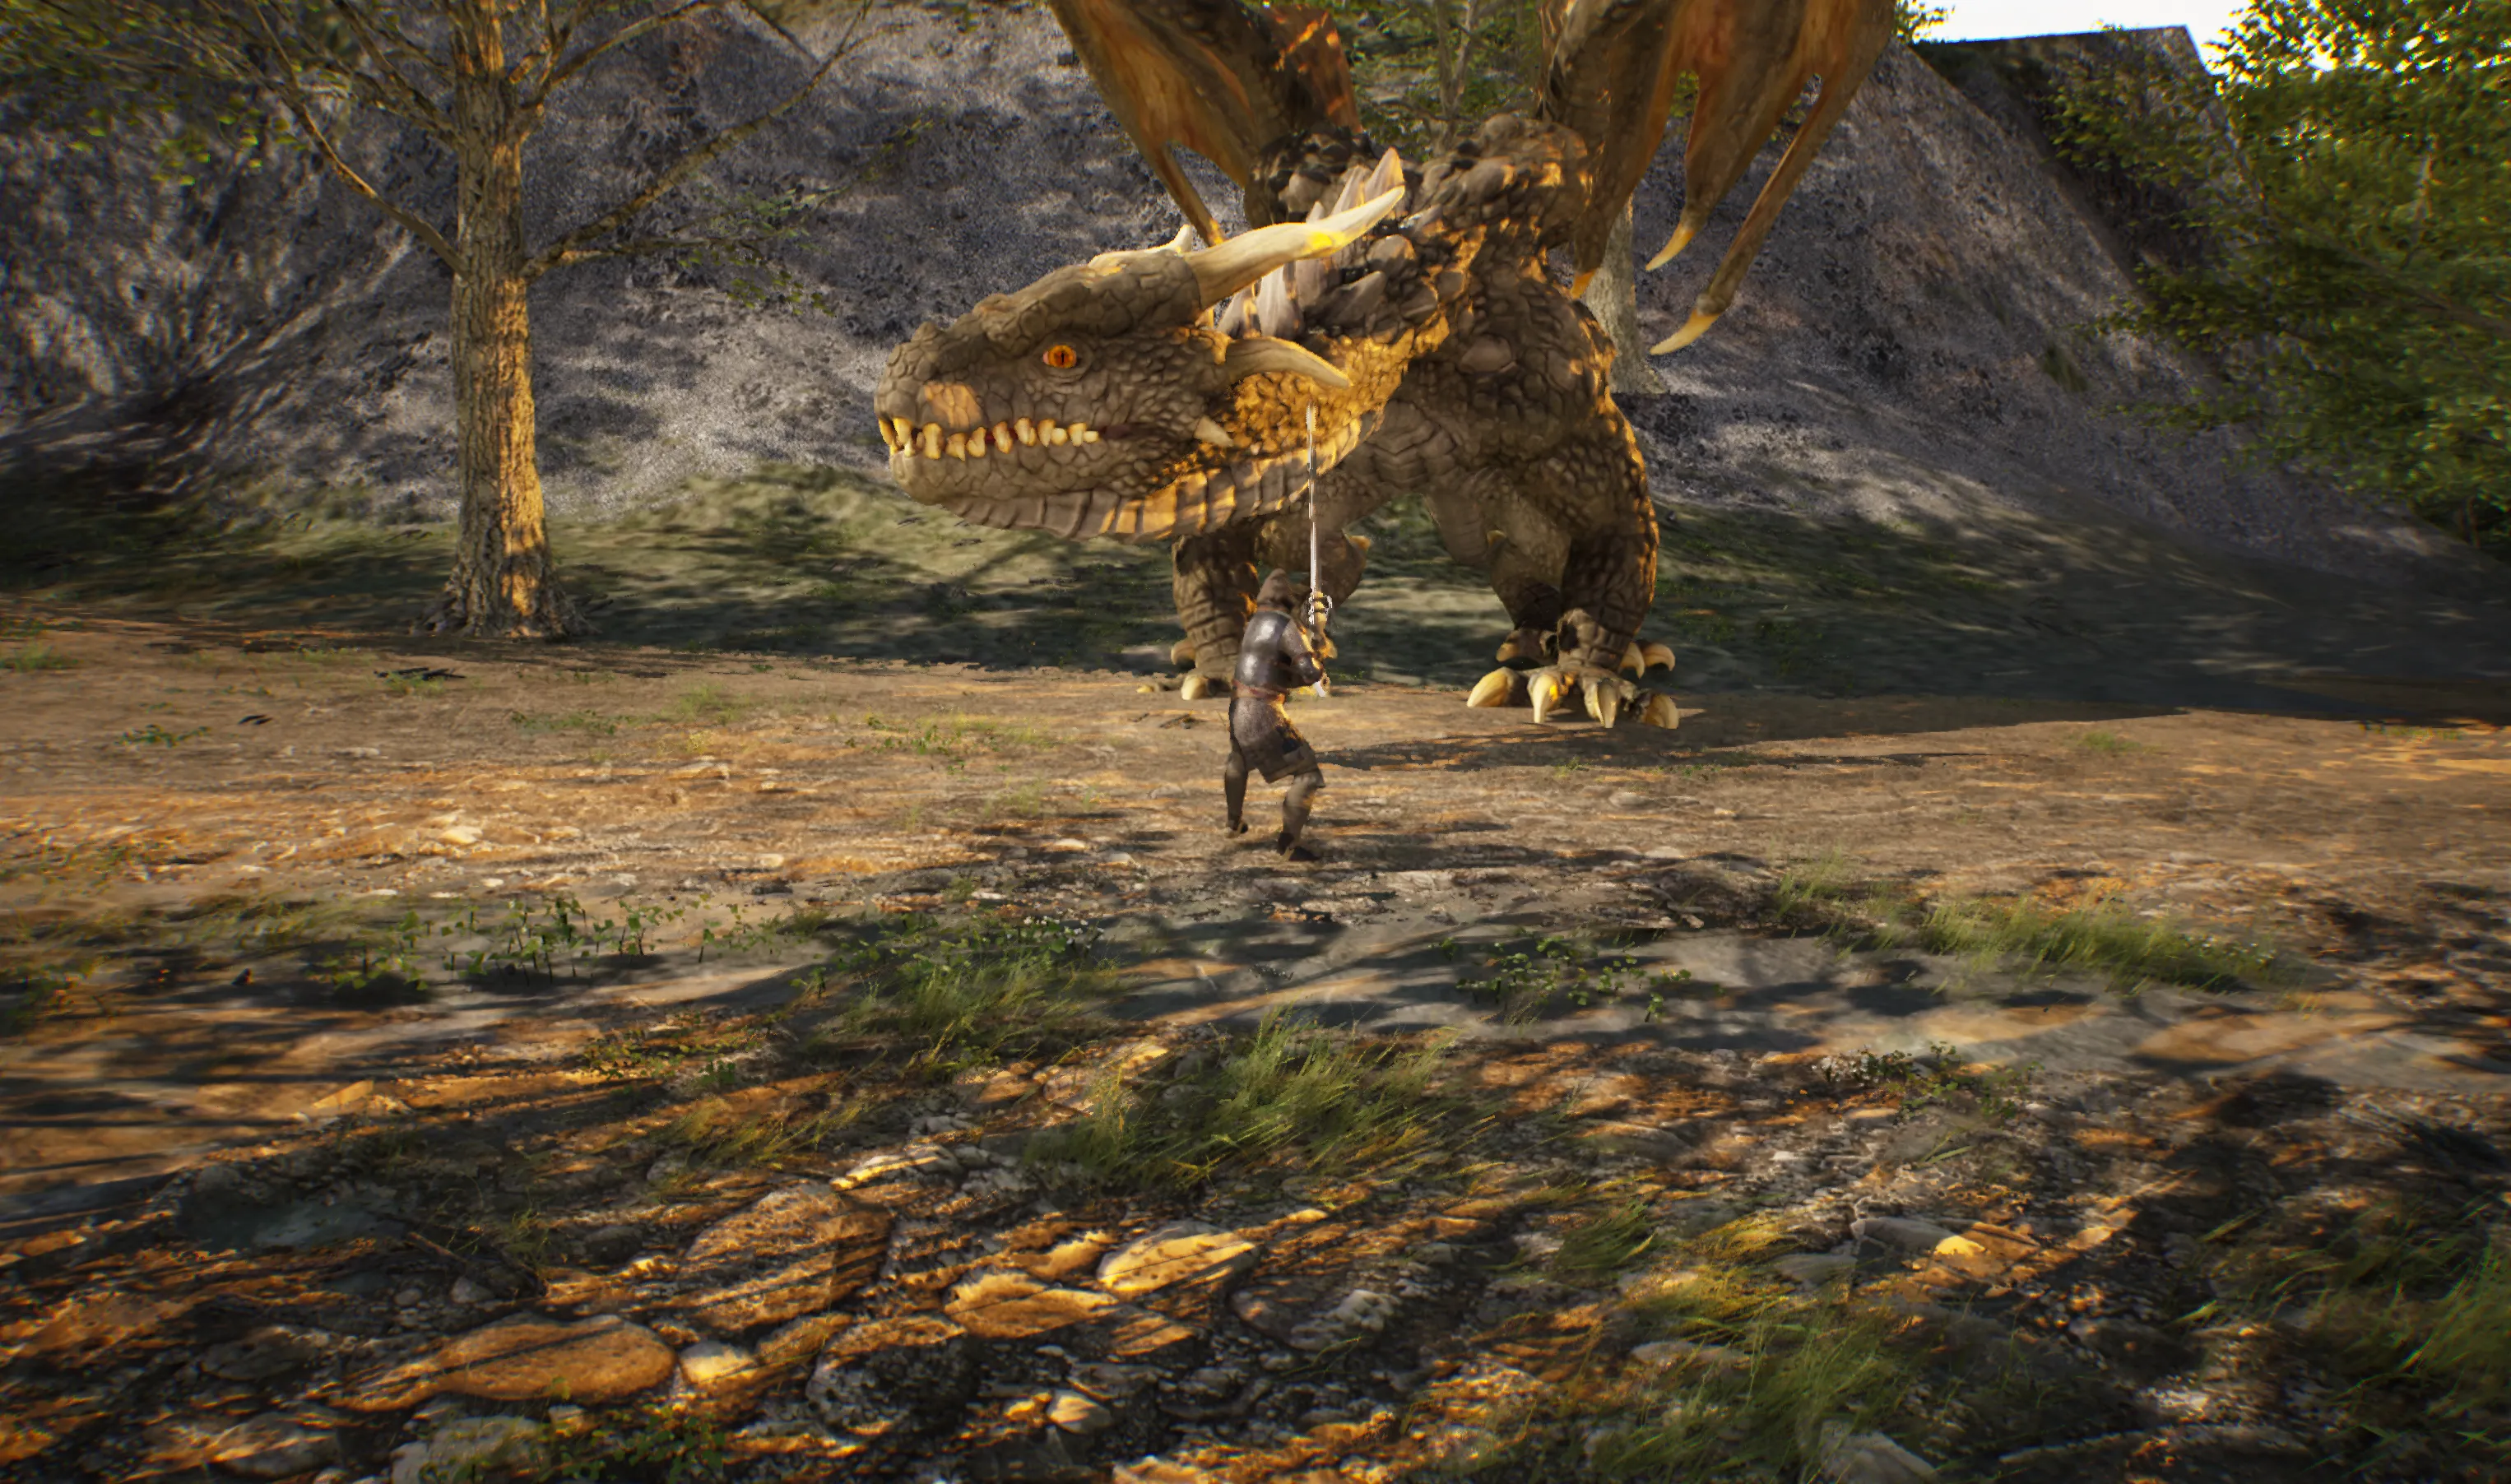 In Metagates, a player is fighting a dragon. Dragons are one of the monsters in the game; they represent ancient wisdom and raw elemental force 